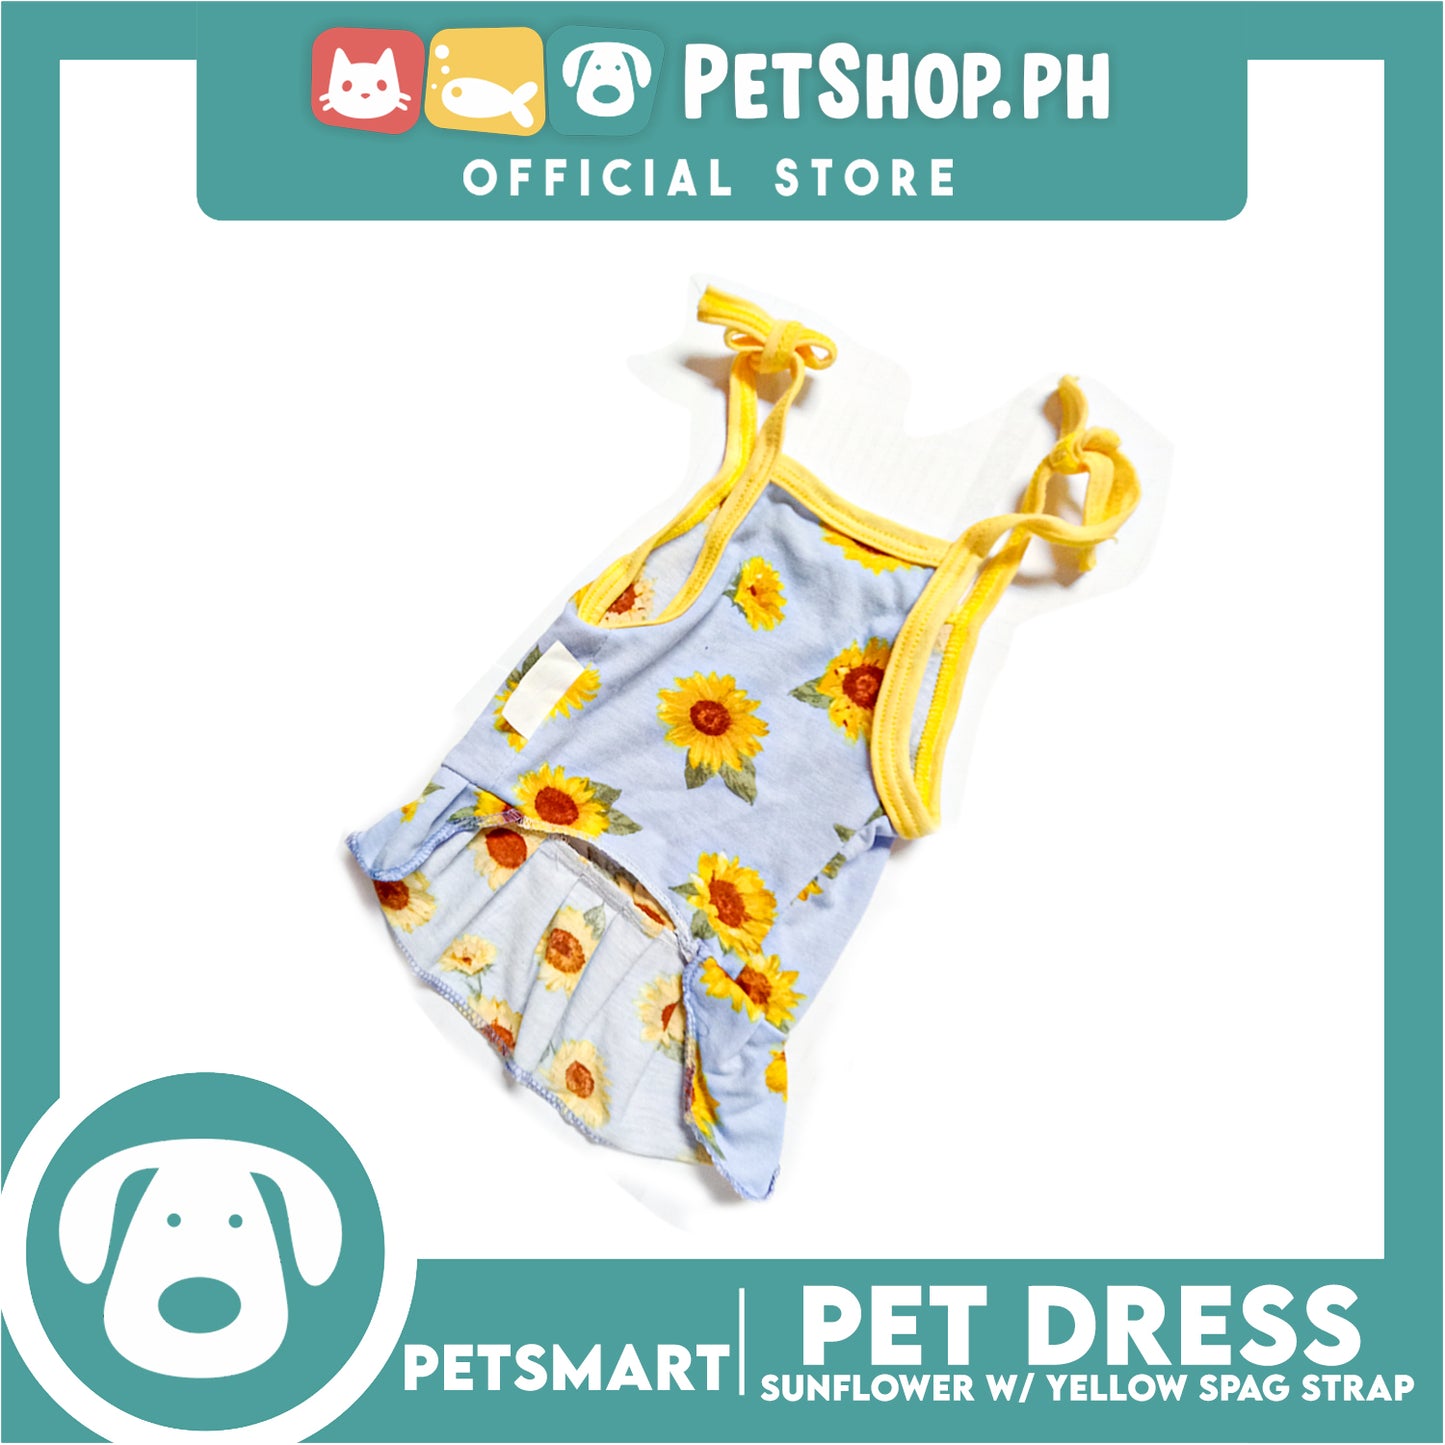 Pet Dress Sunflower With Yellow Spaghetti Strap Dress DG-CTN122S (Small) Perfect Fit For Dogs And Cats, Pet Dress Clothes, Soft and Comfortable Pet Clothing